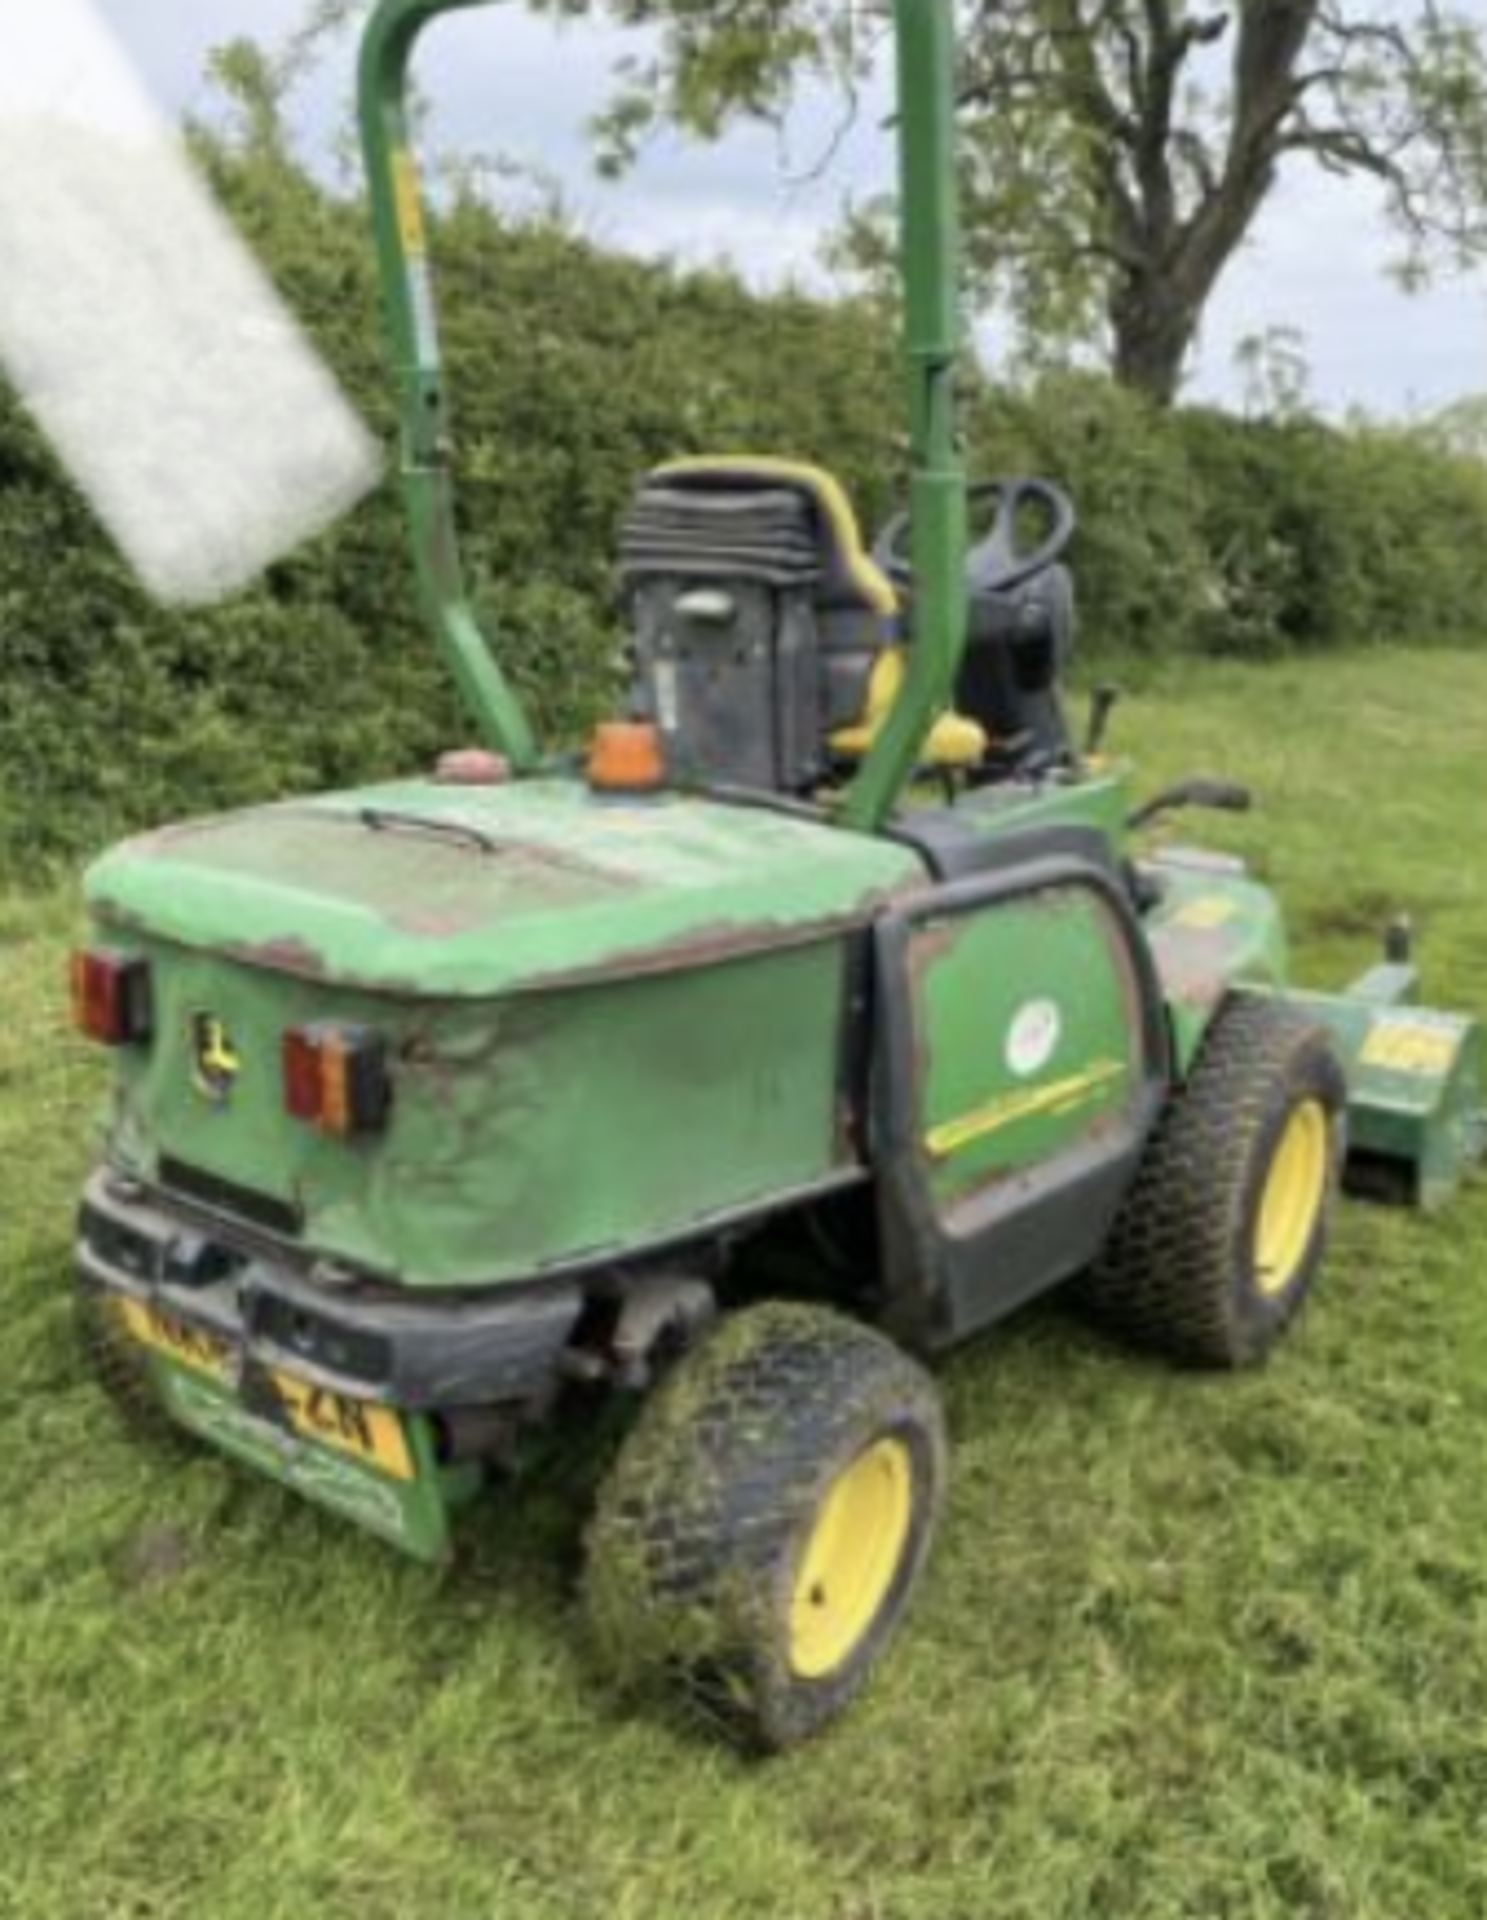 JOHN DEERE 1545 FRONT FLAIL MOWER.YEAR 2012. 1 OWNER FROM NEW. HOURS 2900. LOCATION NORTH YORKSHIRE. - Image 4 of 6